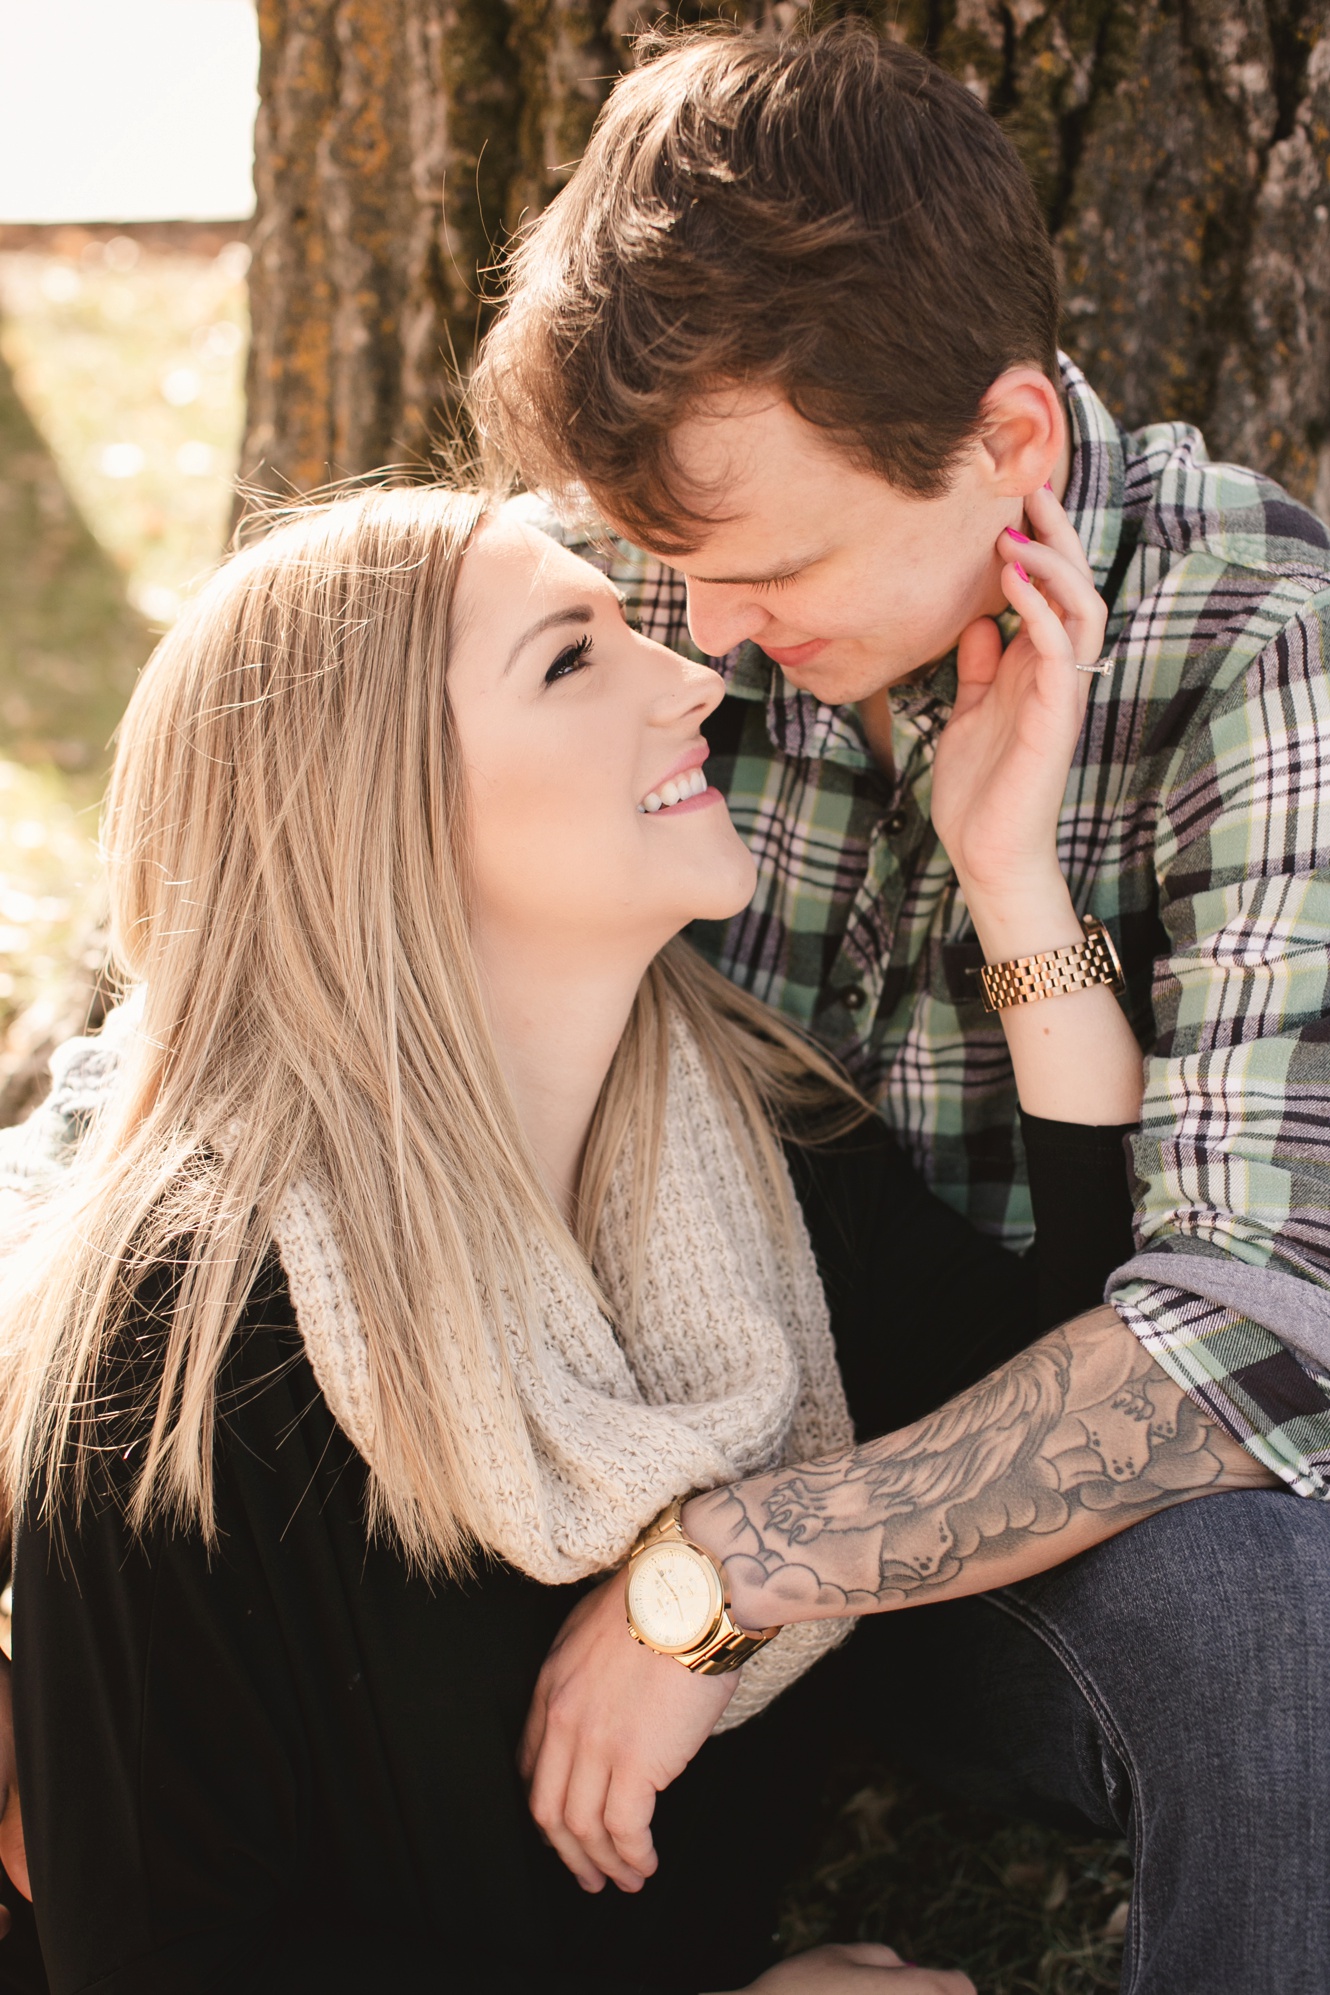 Pose ideas for engagement sessions photo